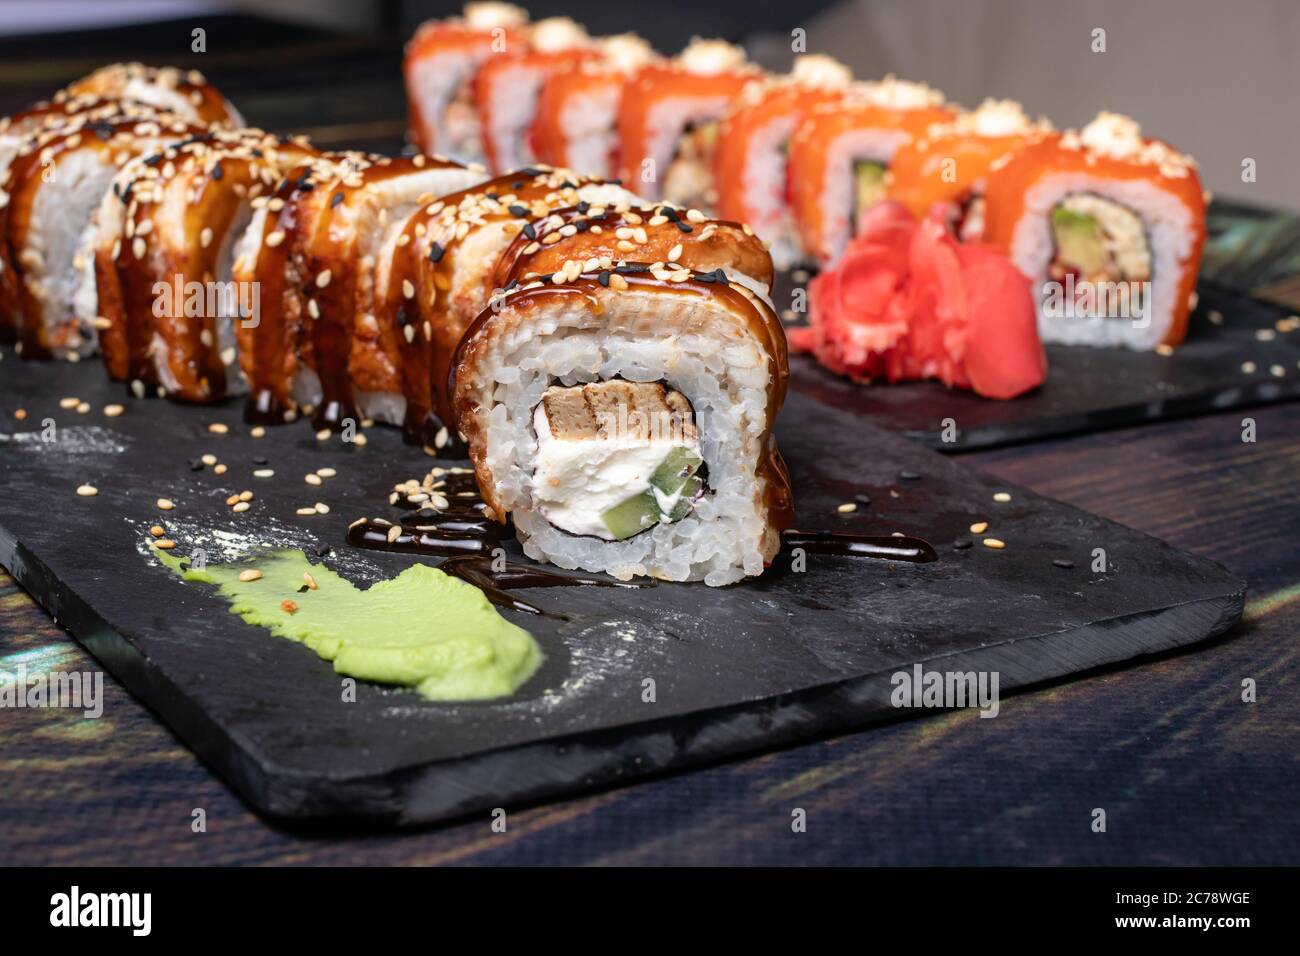 Sushi and rolls. Japanese food, seafood and raw fish with wasabi sauce Stock Photo